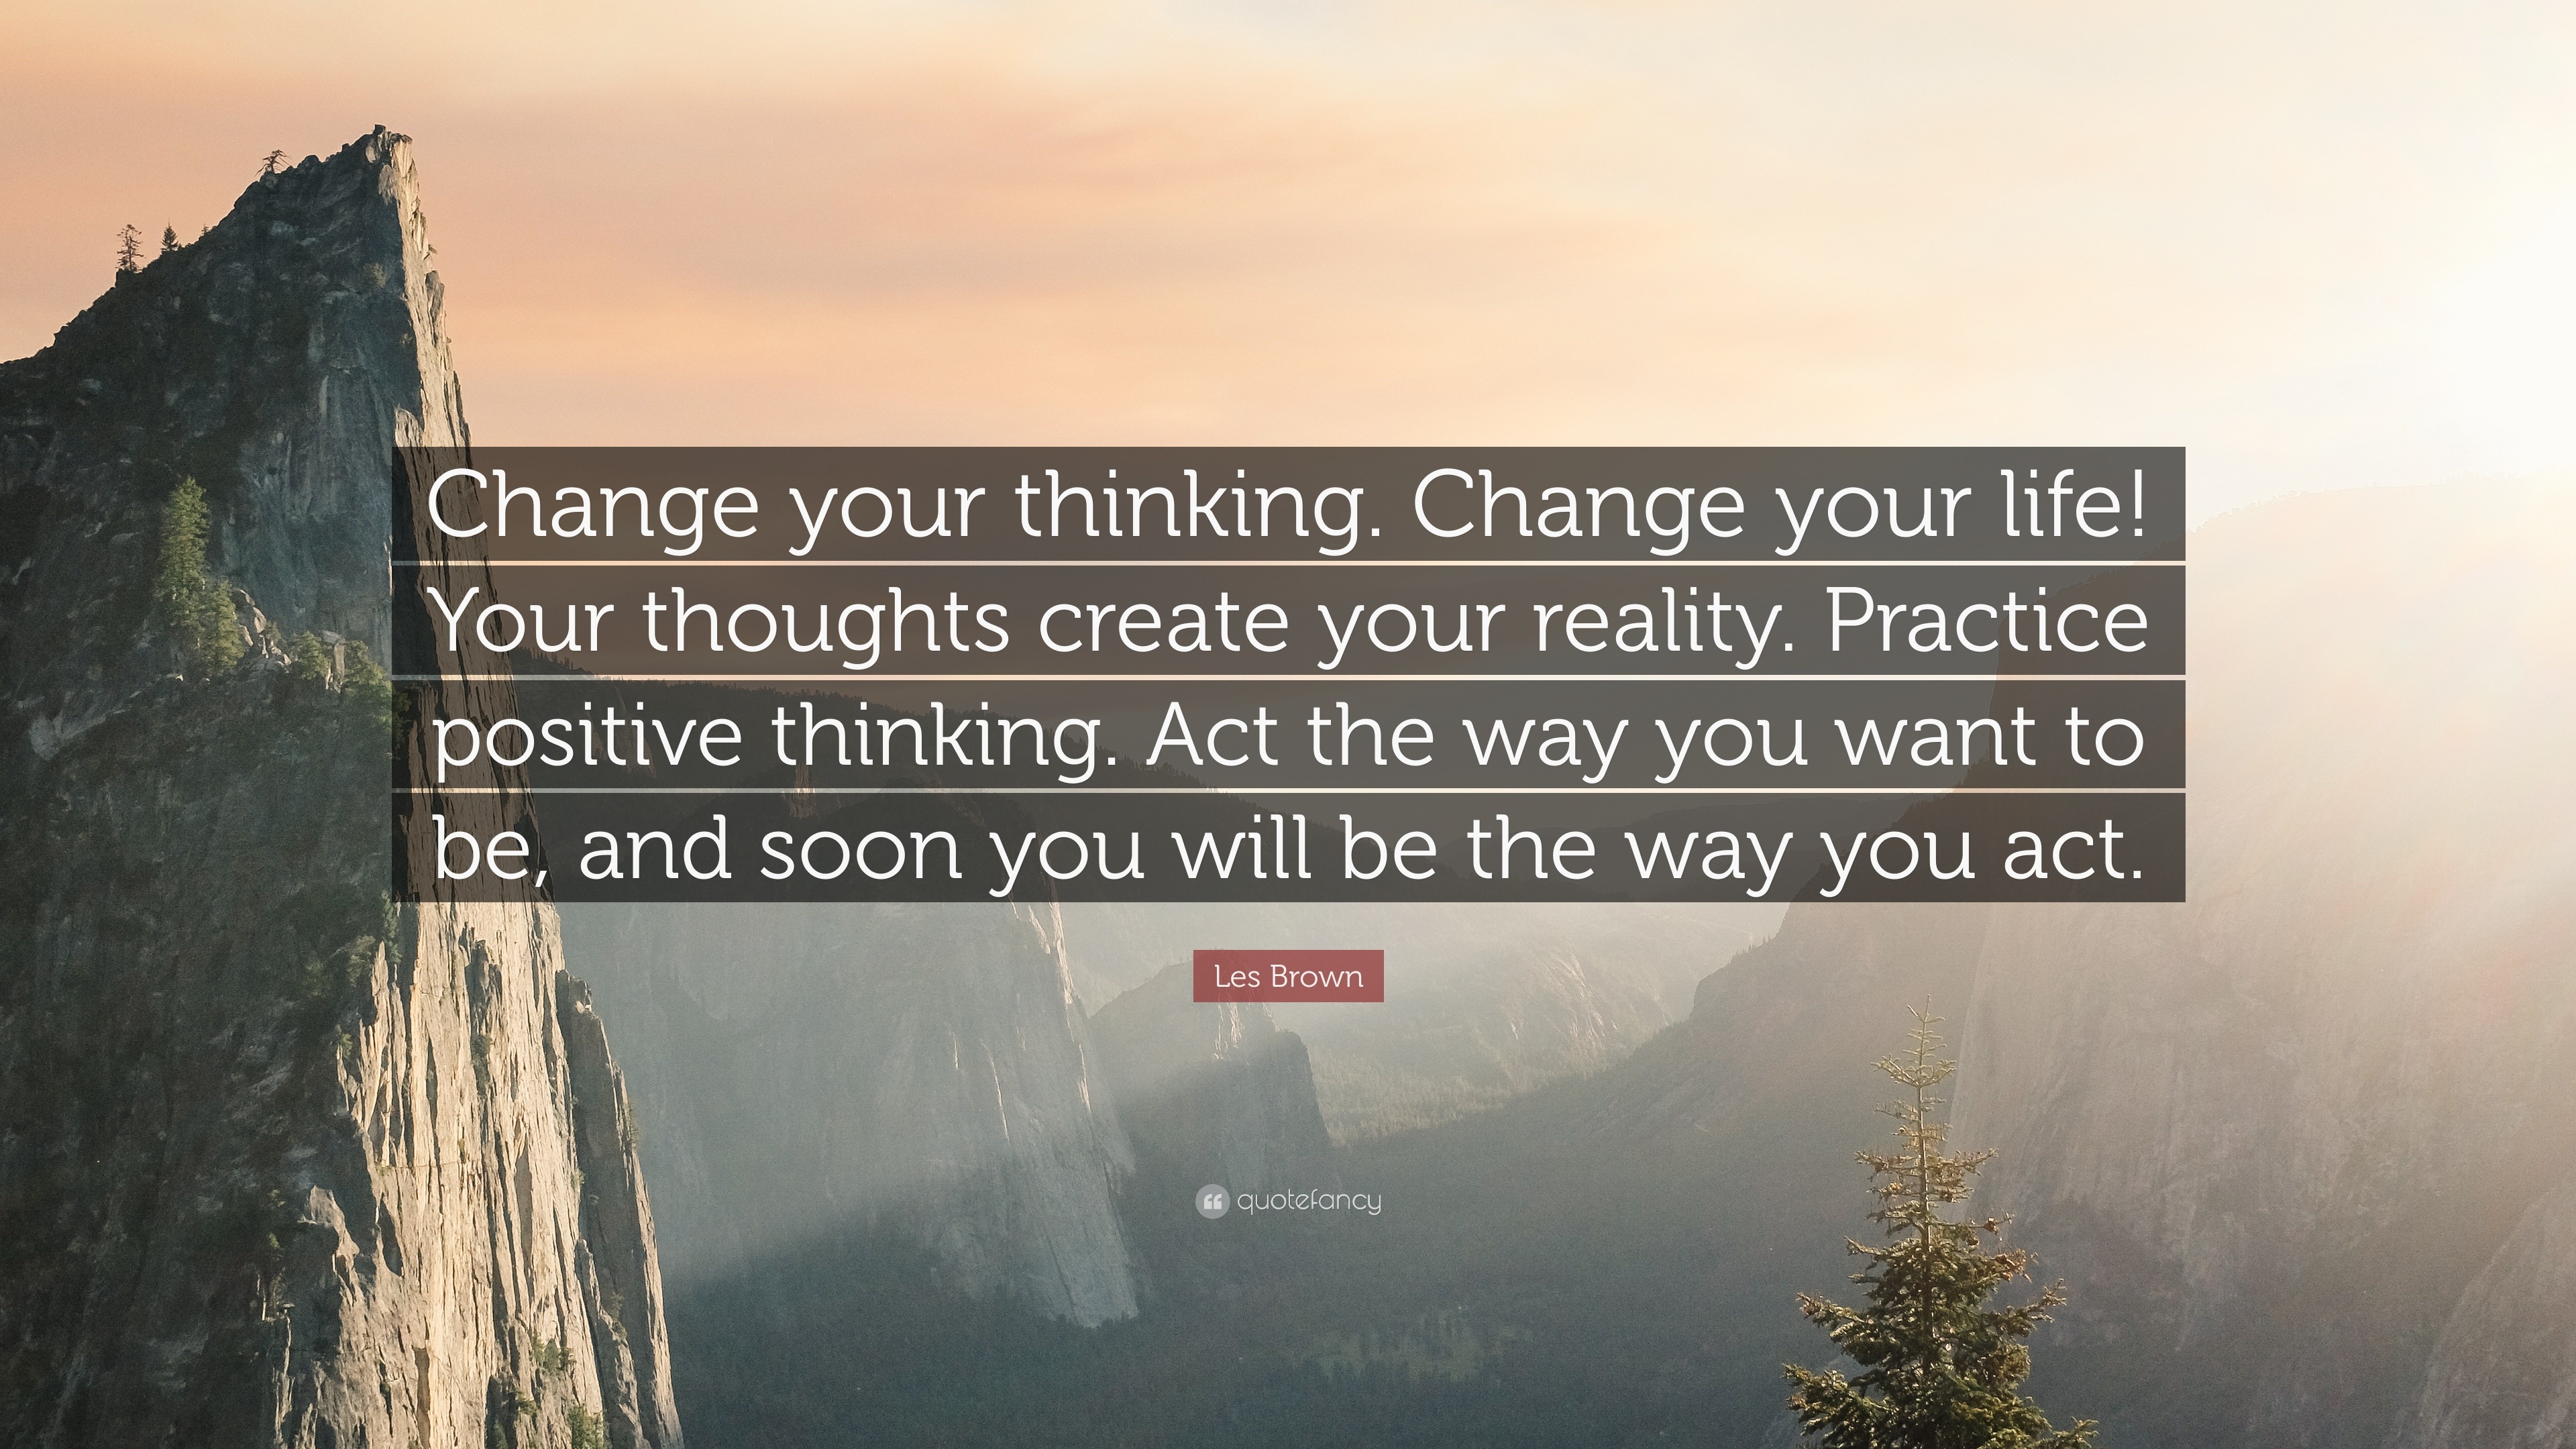 Les Brown Quote: “Change your thinking. Change your life! Your thoughts